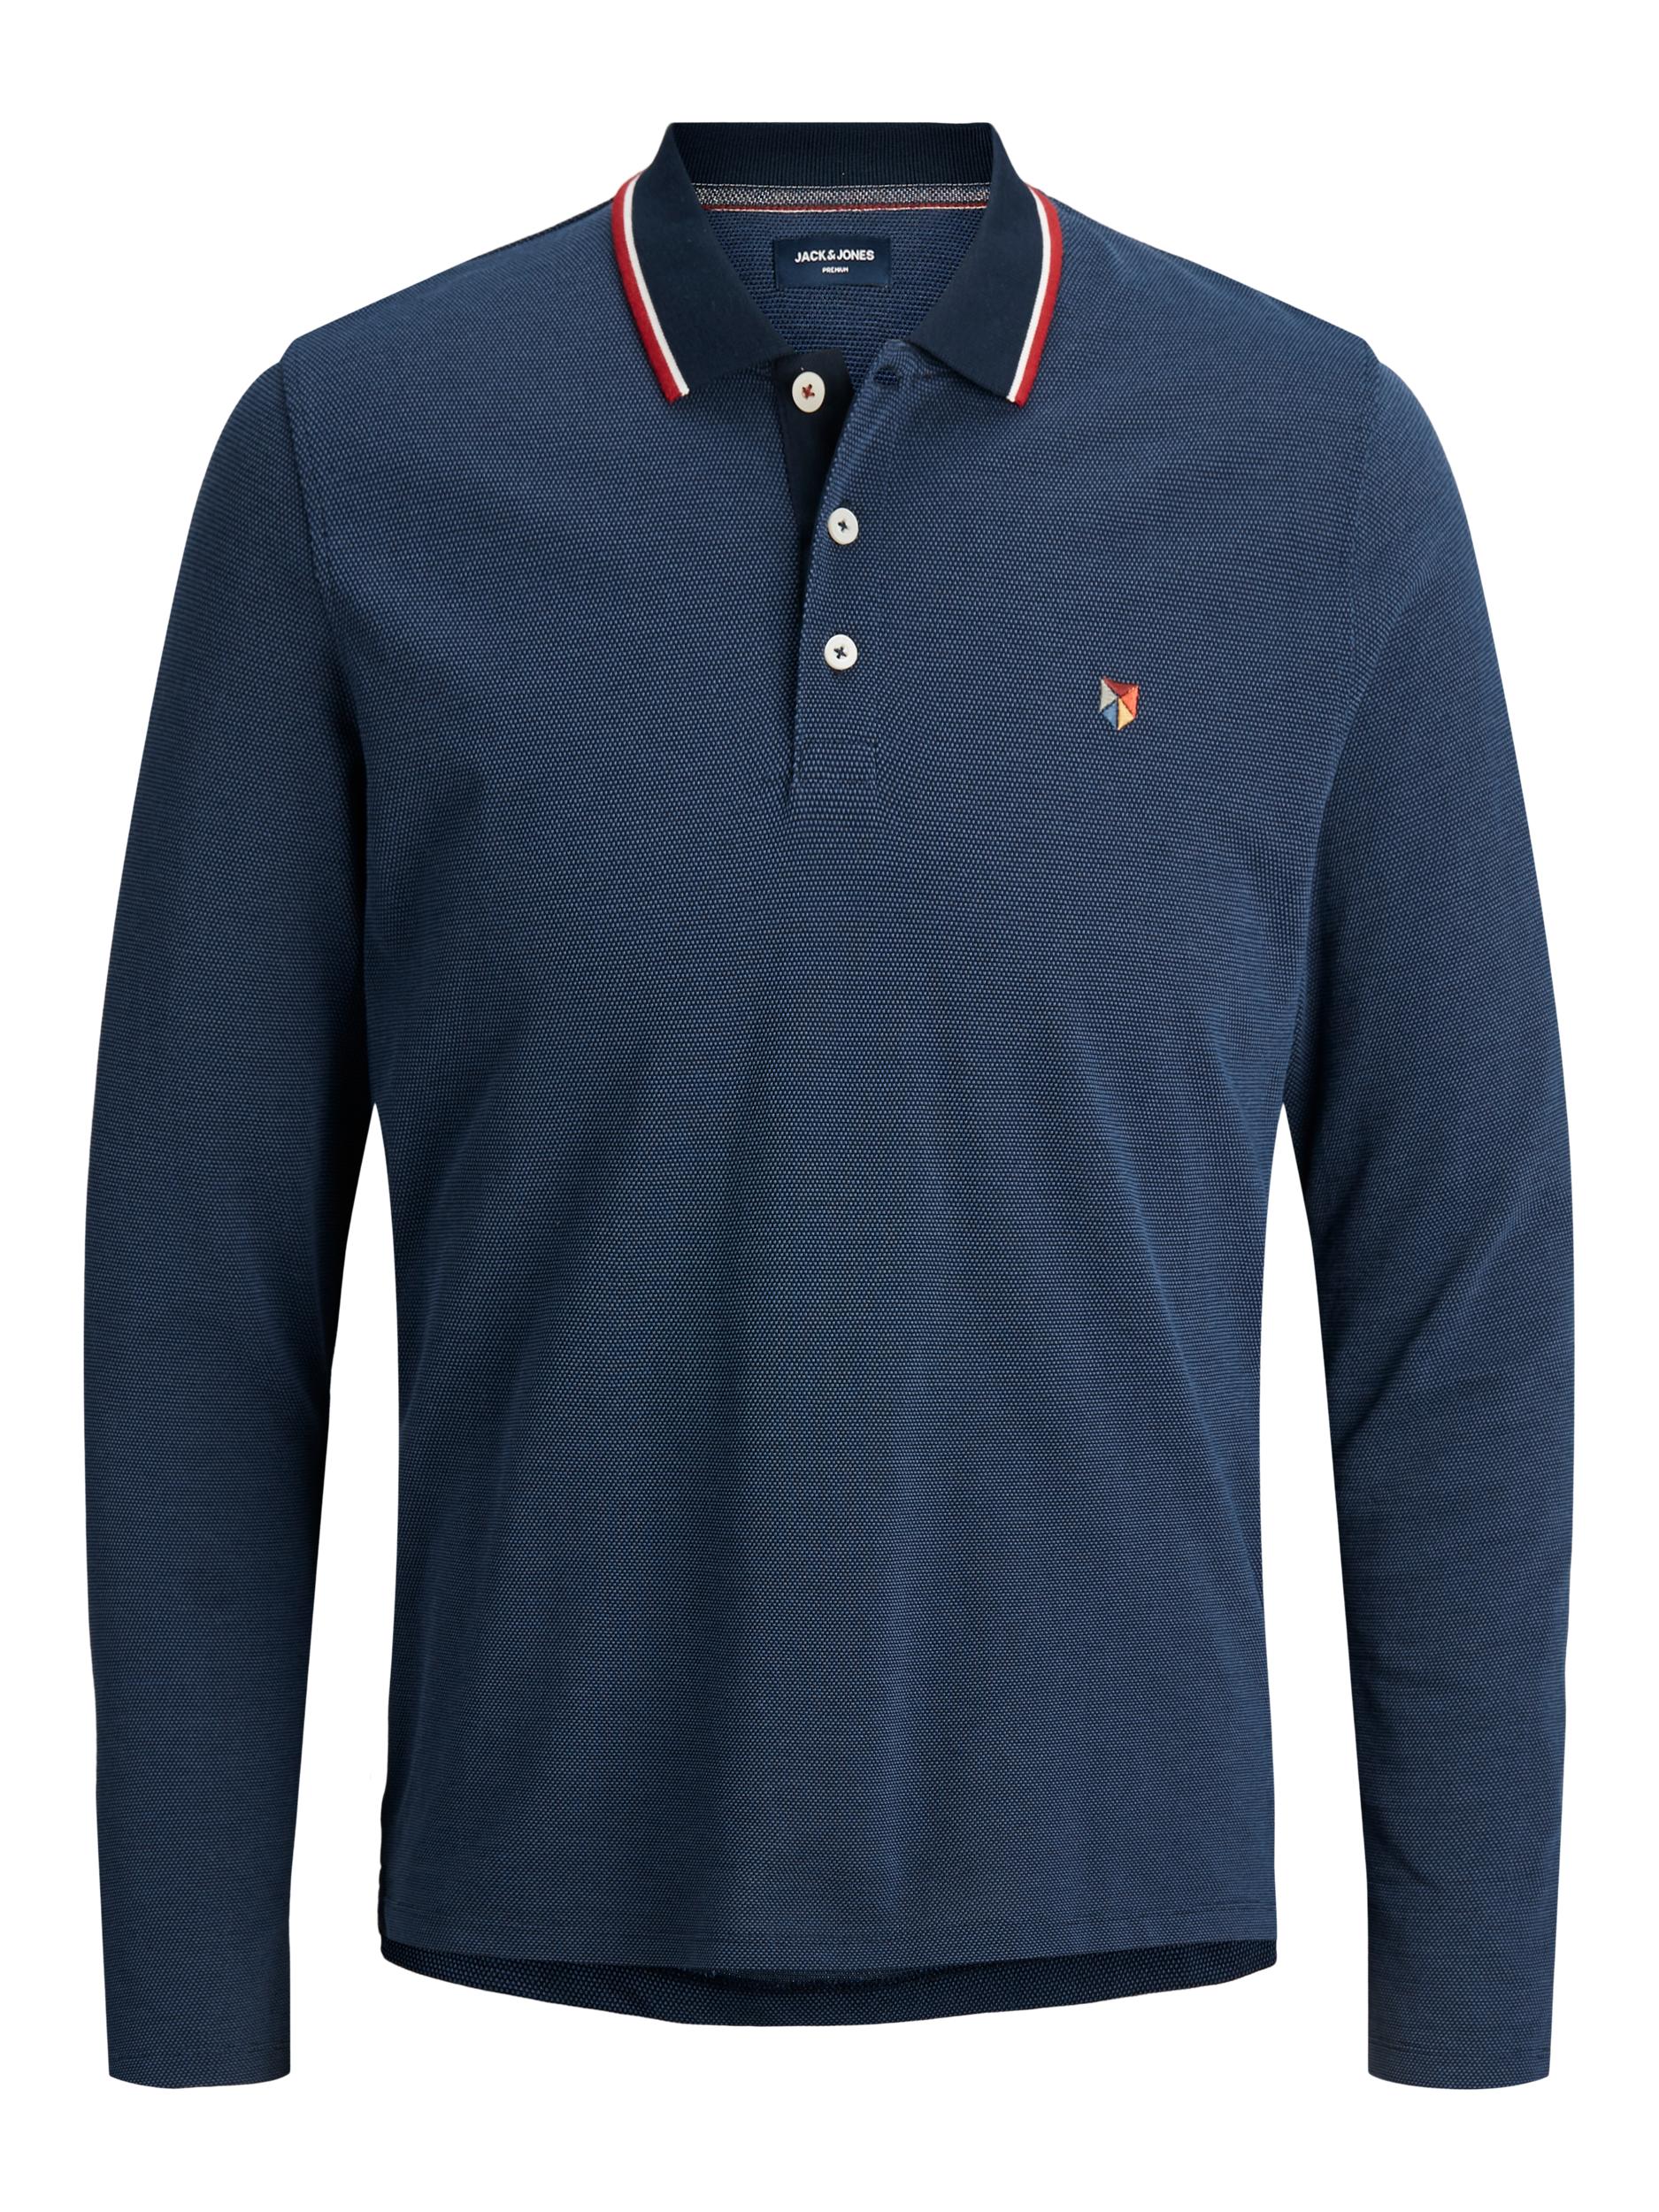 Men's Win Polo Long Sleeve-Navy Blazer-Ghost Front View